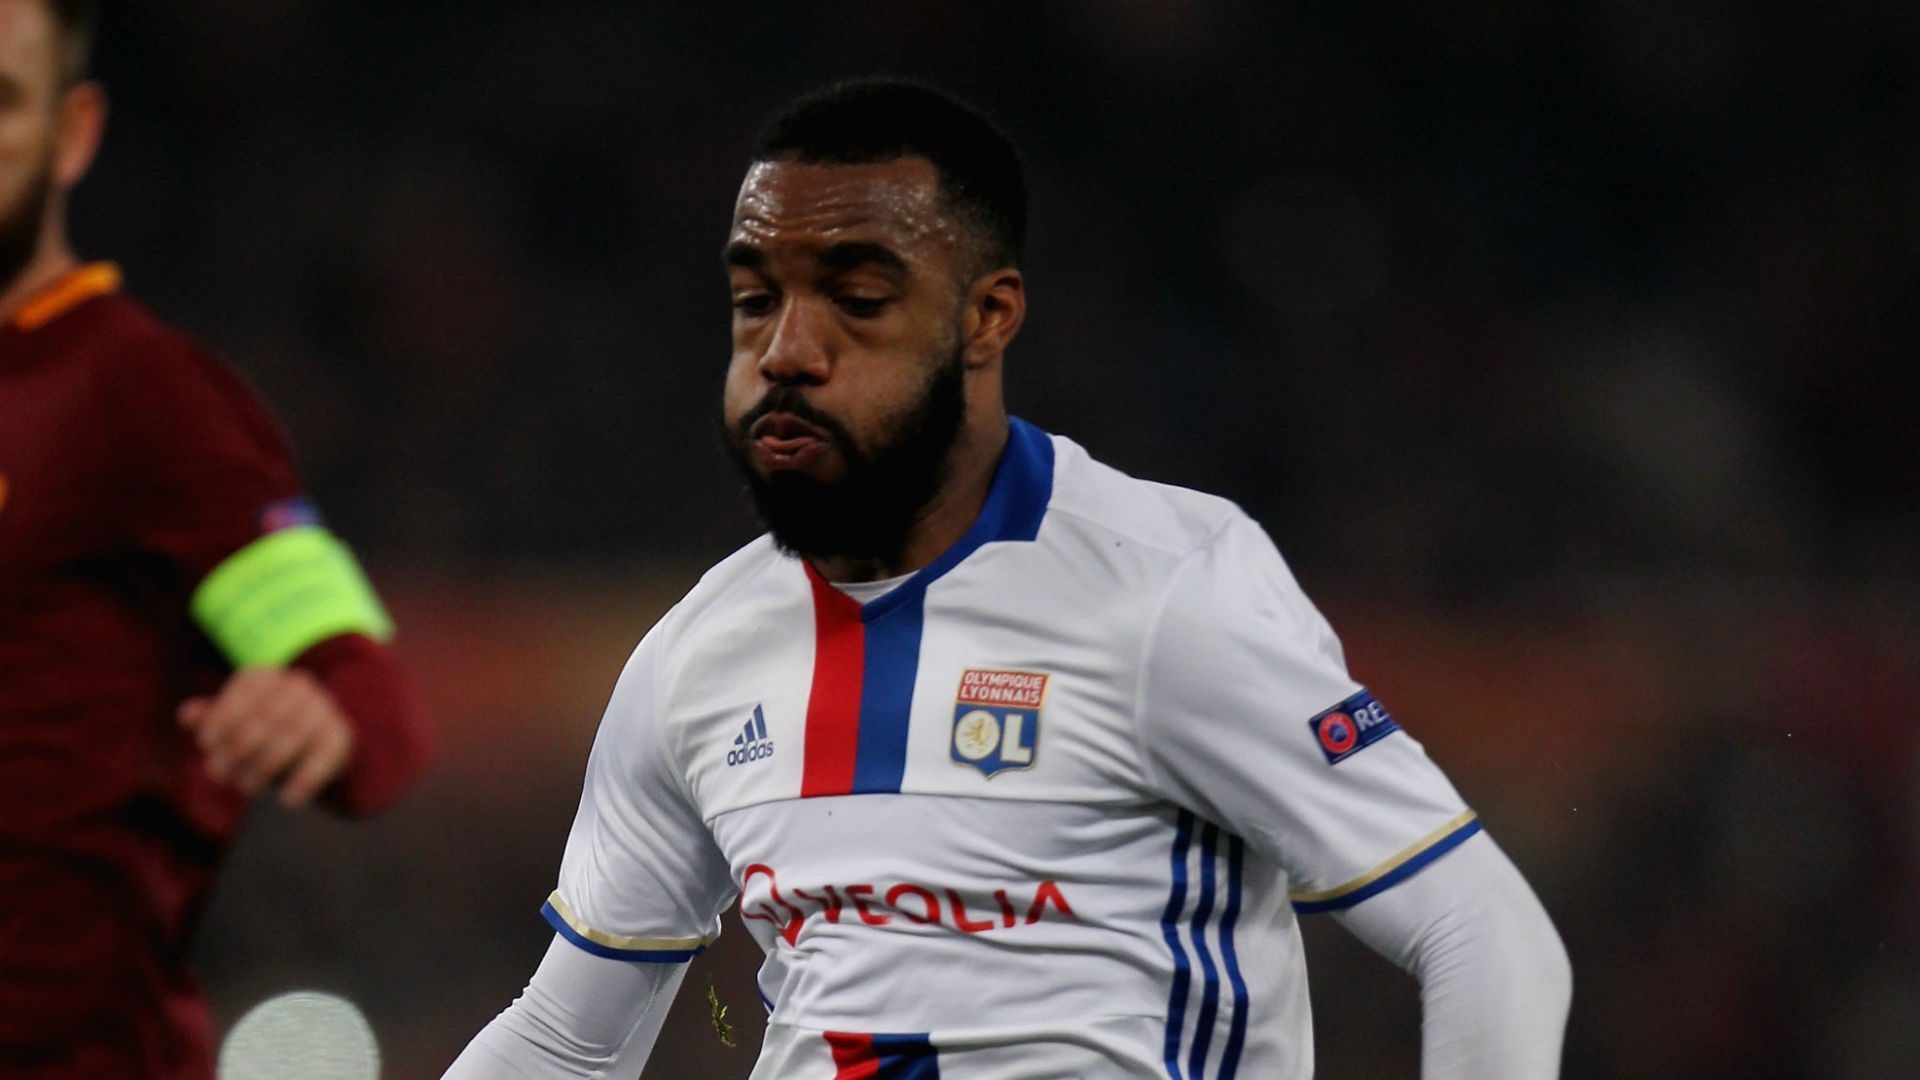 "I hope the Lacazette deal leaves [Sanchez] at the club," Winterburn told Sky Sports.